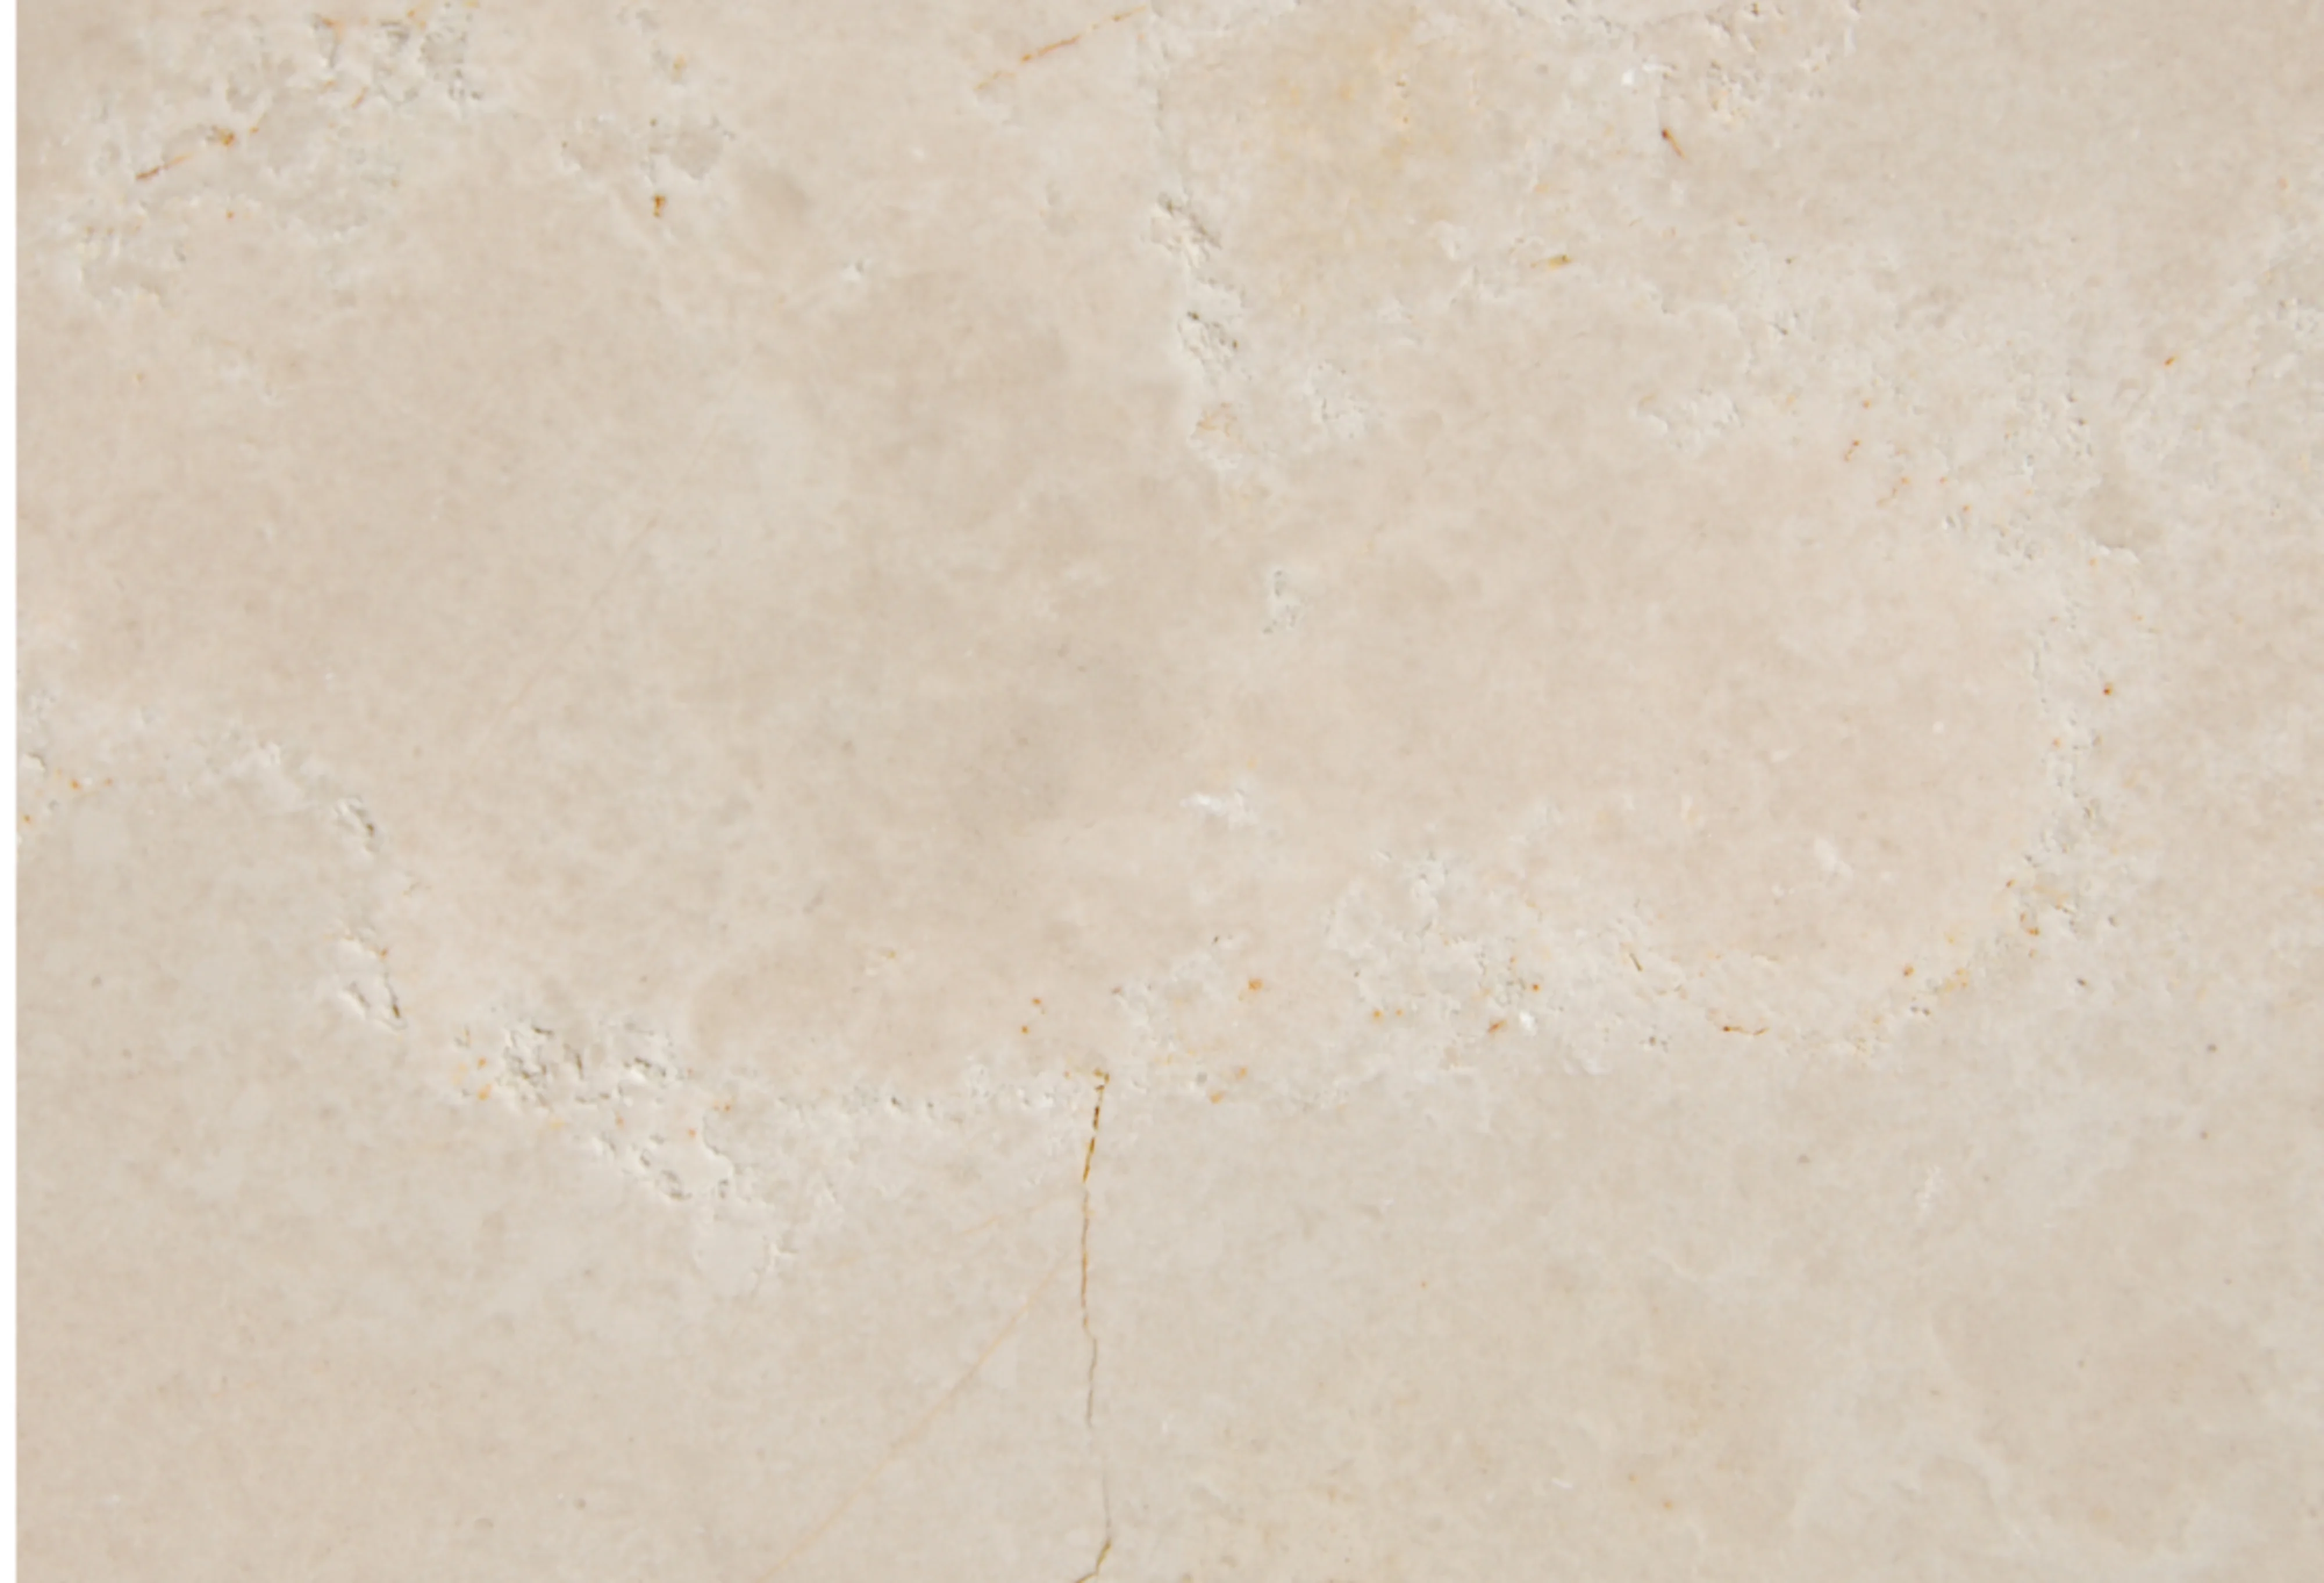 A beige, solid limestone surface.